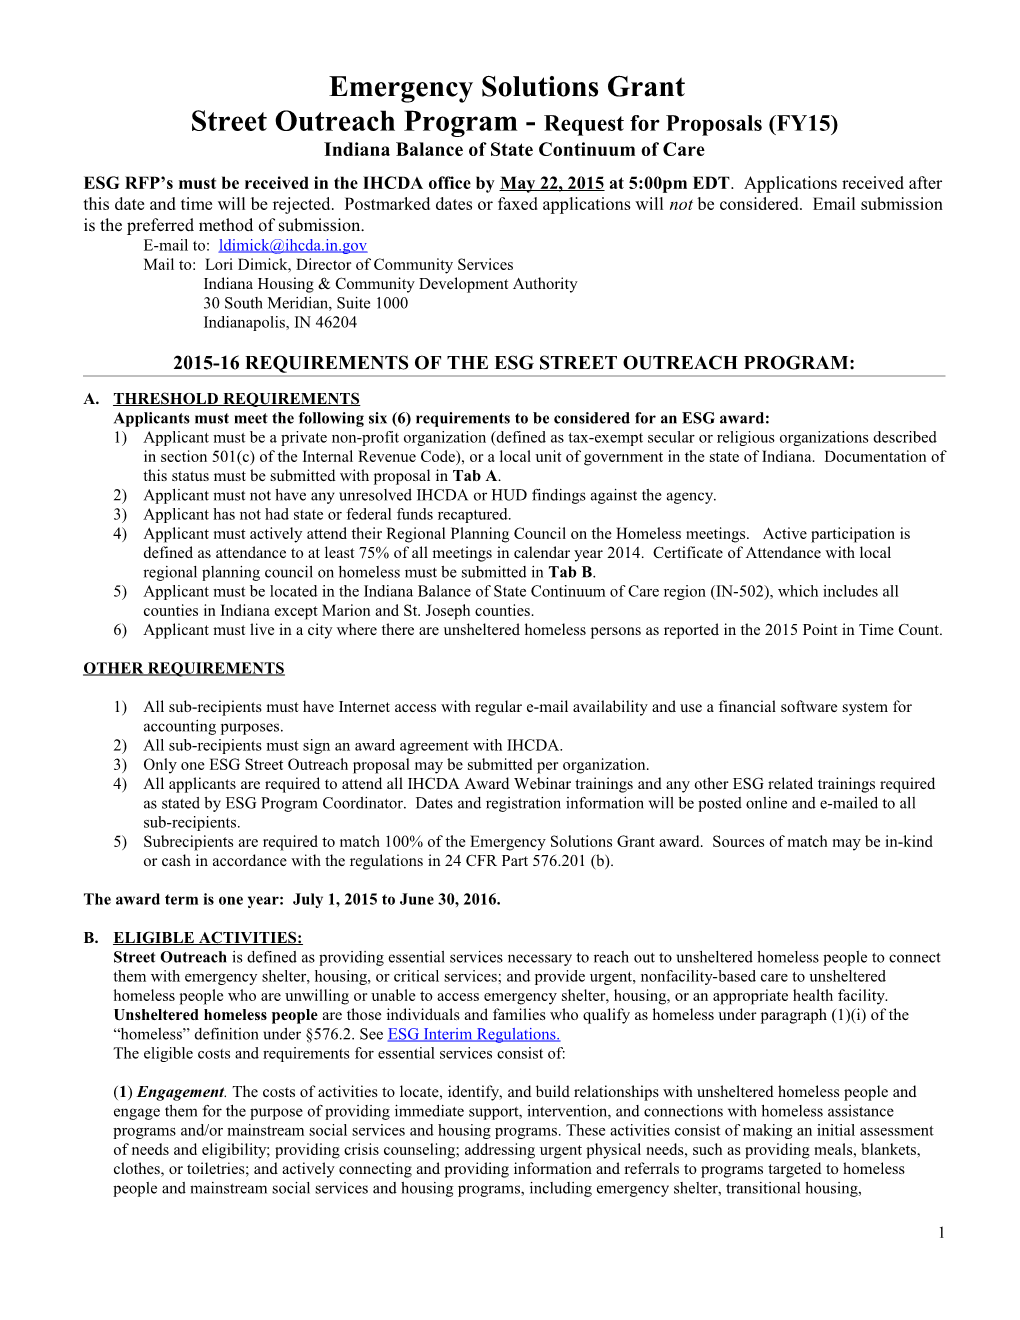 Street Outreach Program - Request for Proposals (FY15)